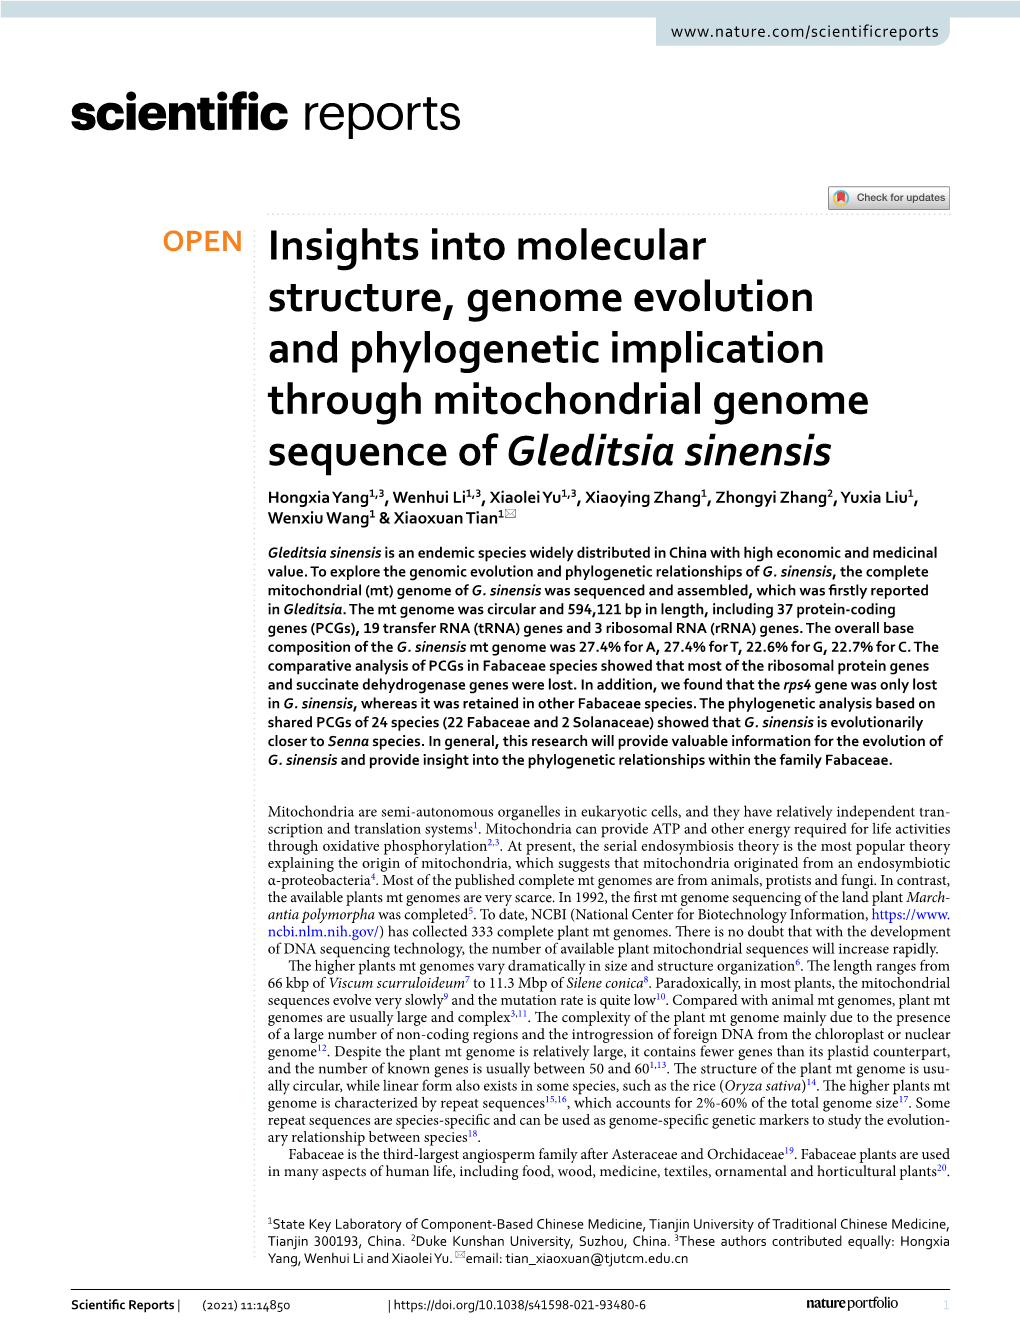 Insights Into Molecular Structure, Genome Evolution and Phylogenetic